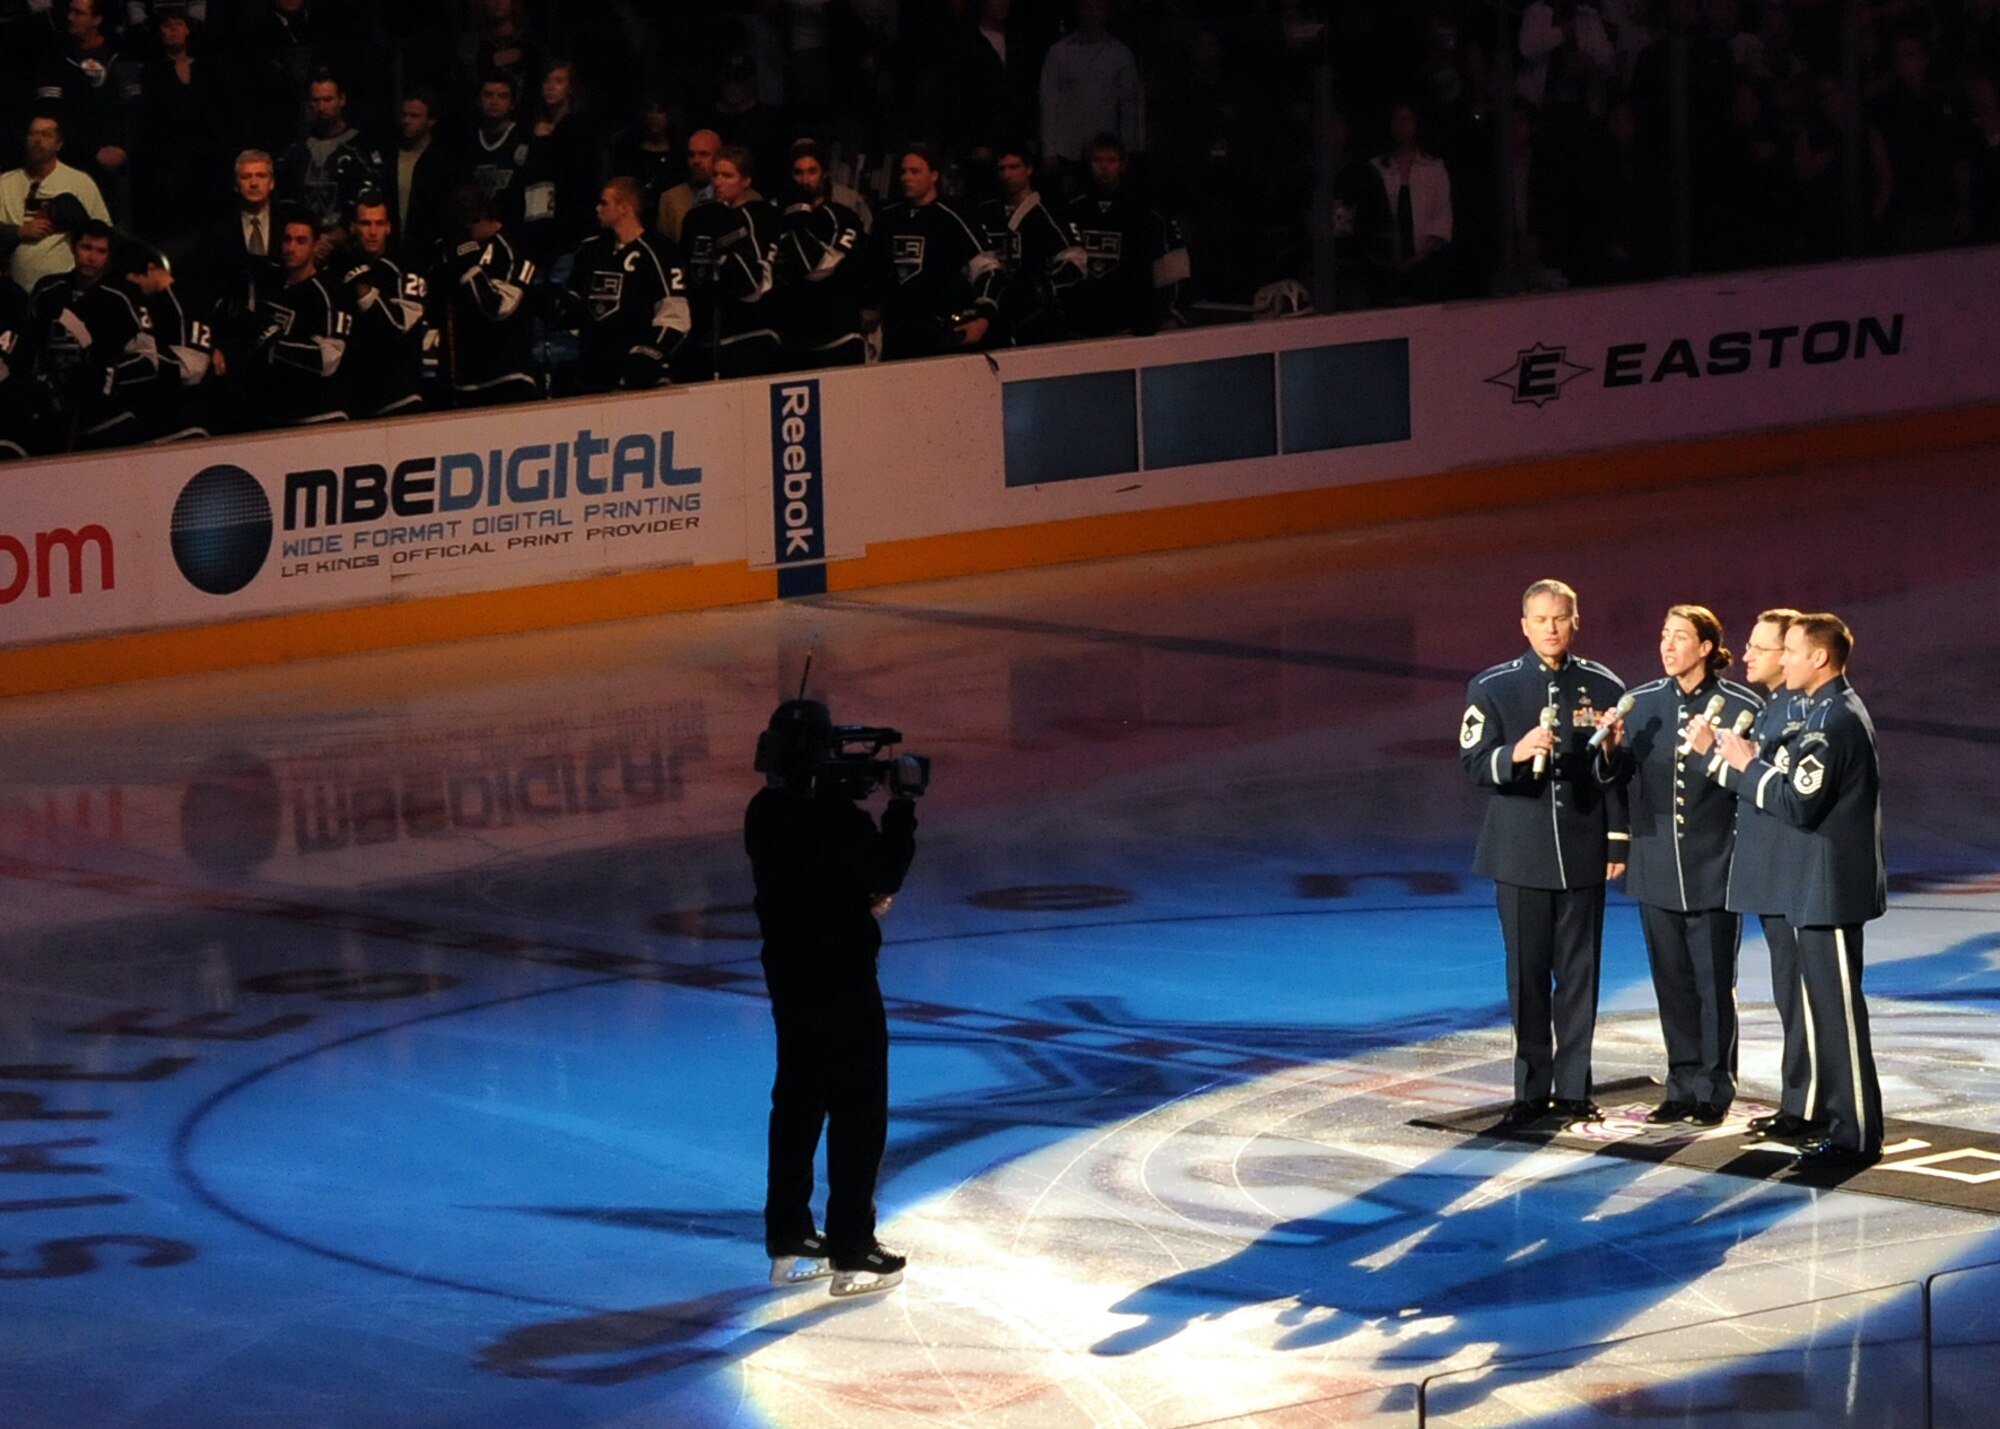 Members of the USAFA Band perform God Bless America and the National Anthem at the Staples Center in Los Angeles, Calif., before the LA Kings play the Phoenix Coyotes, Feb 21. “Blue Steel” is a component of the United States Air Force Academy Band that performs popular music to enhance community relations and support the recruiting mission of the U.S. Air Force. (Photo by Atiba S. Copeland)